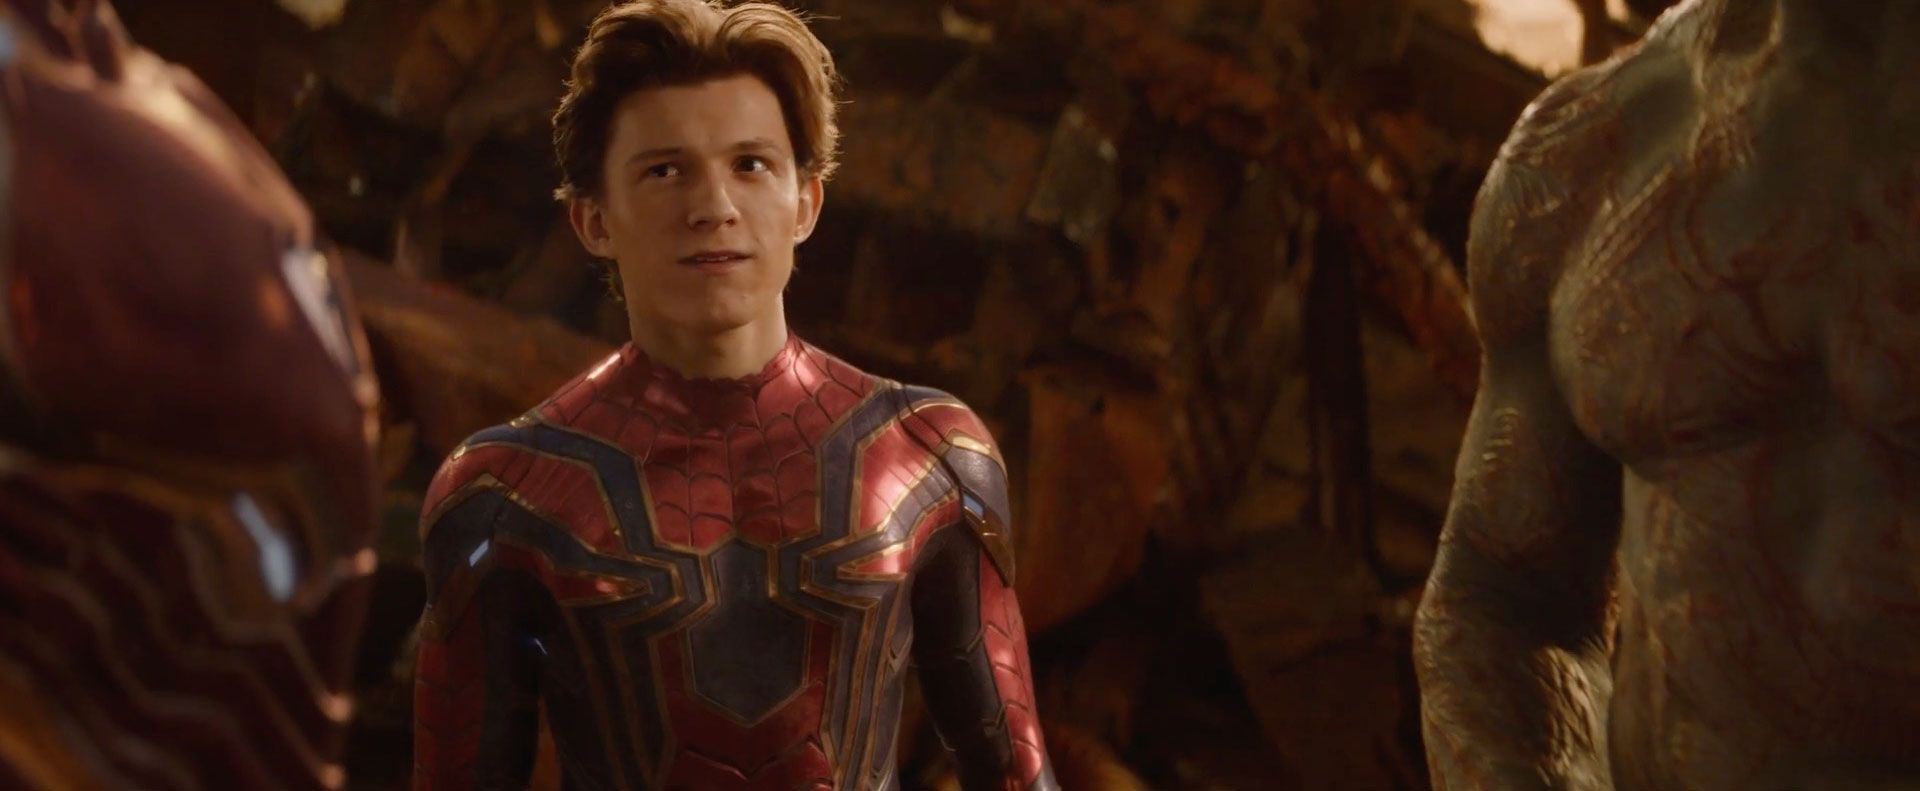 Spider-Man officially joins the Avengers in Infinity War teaser